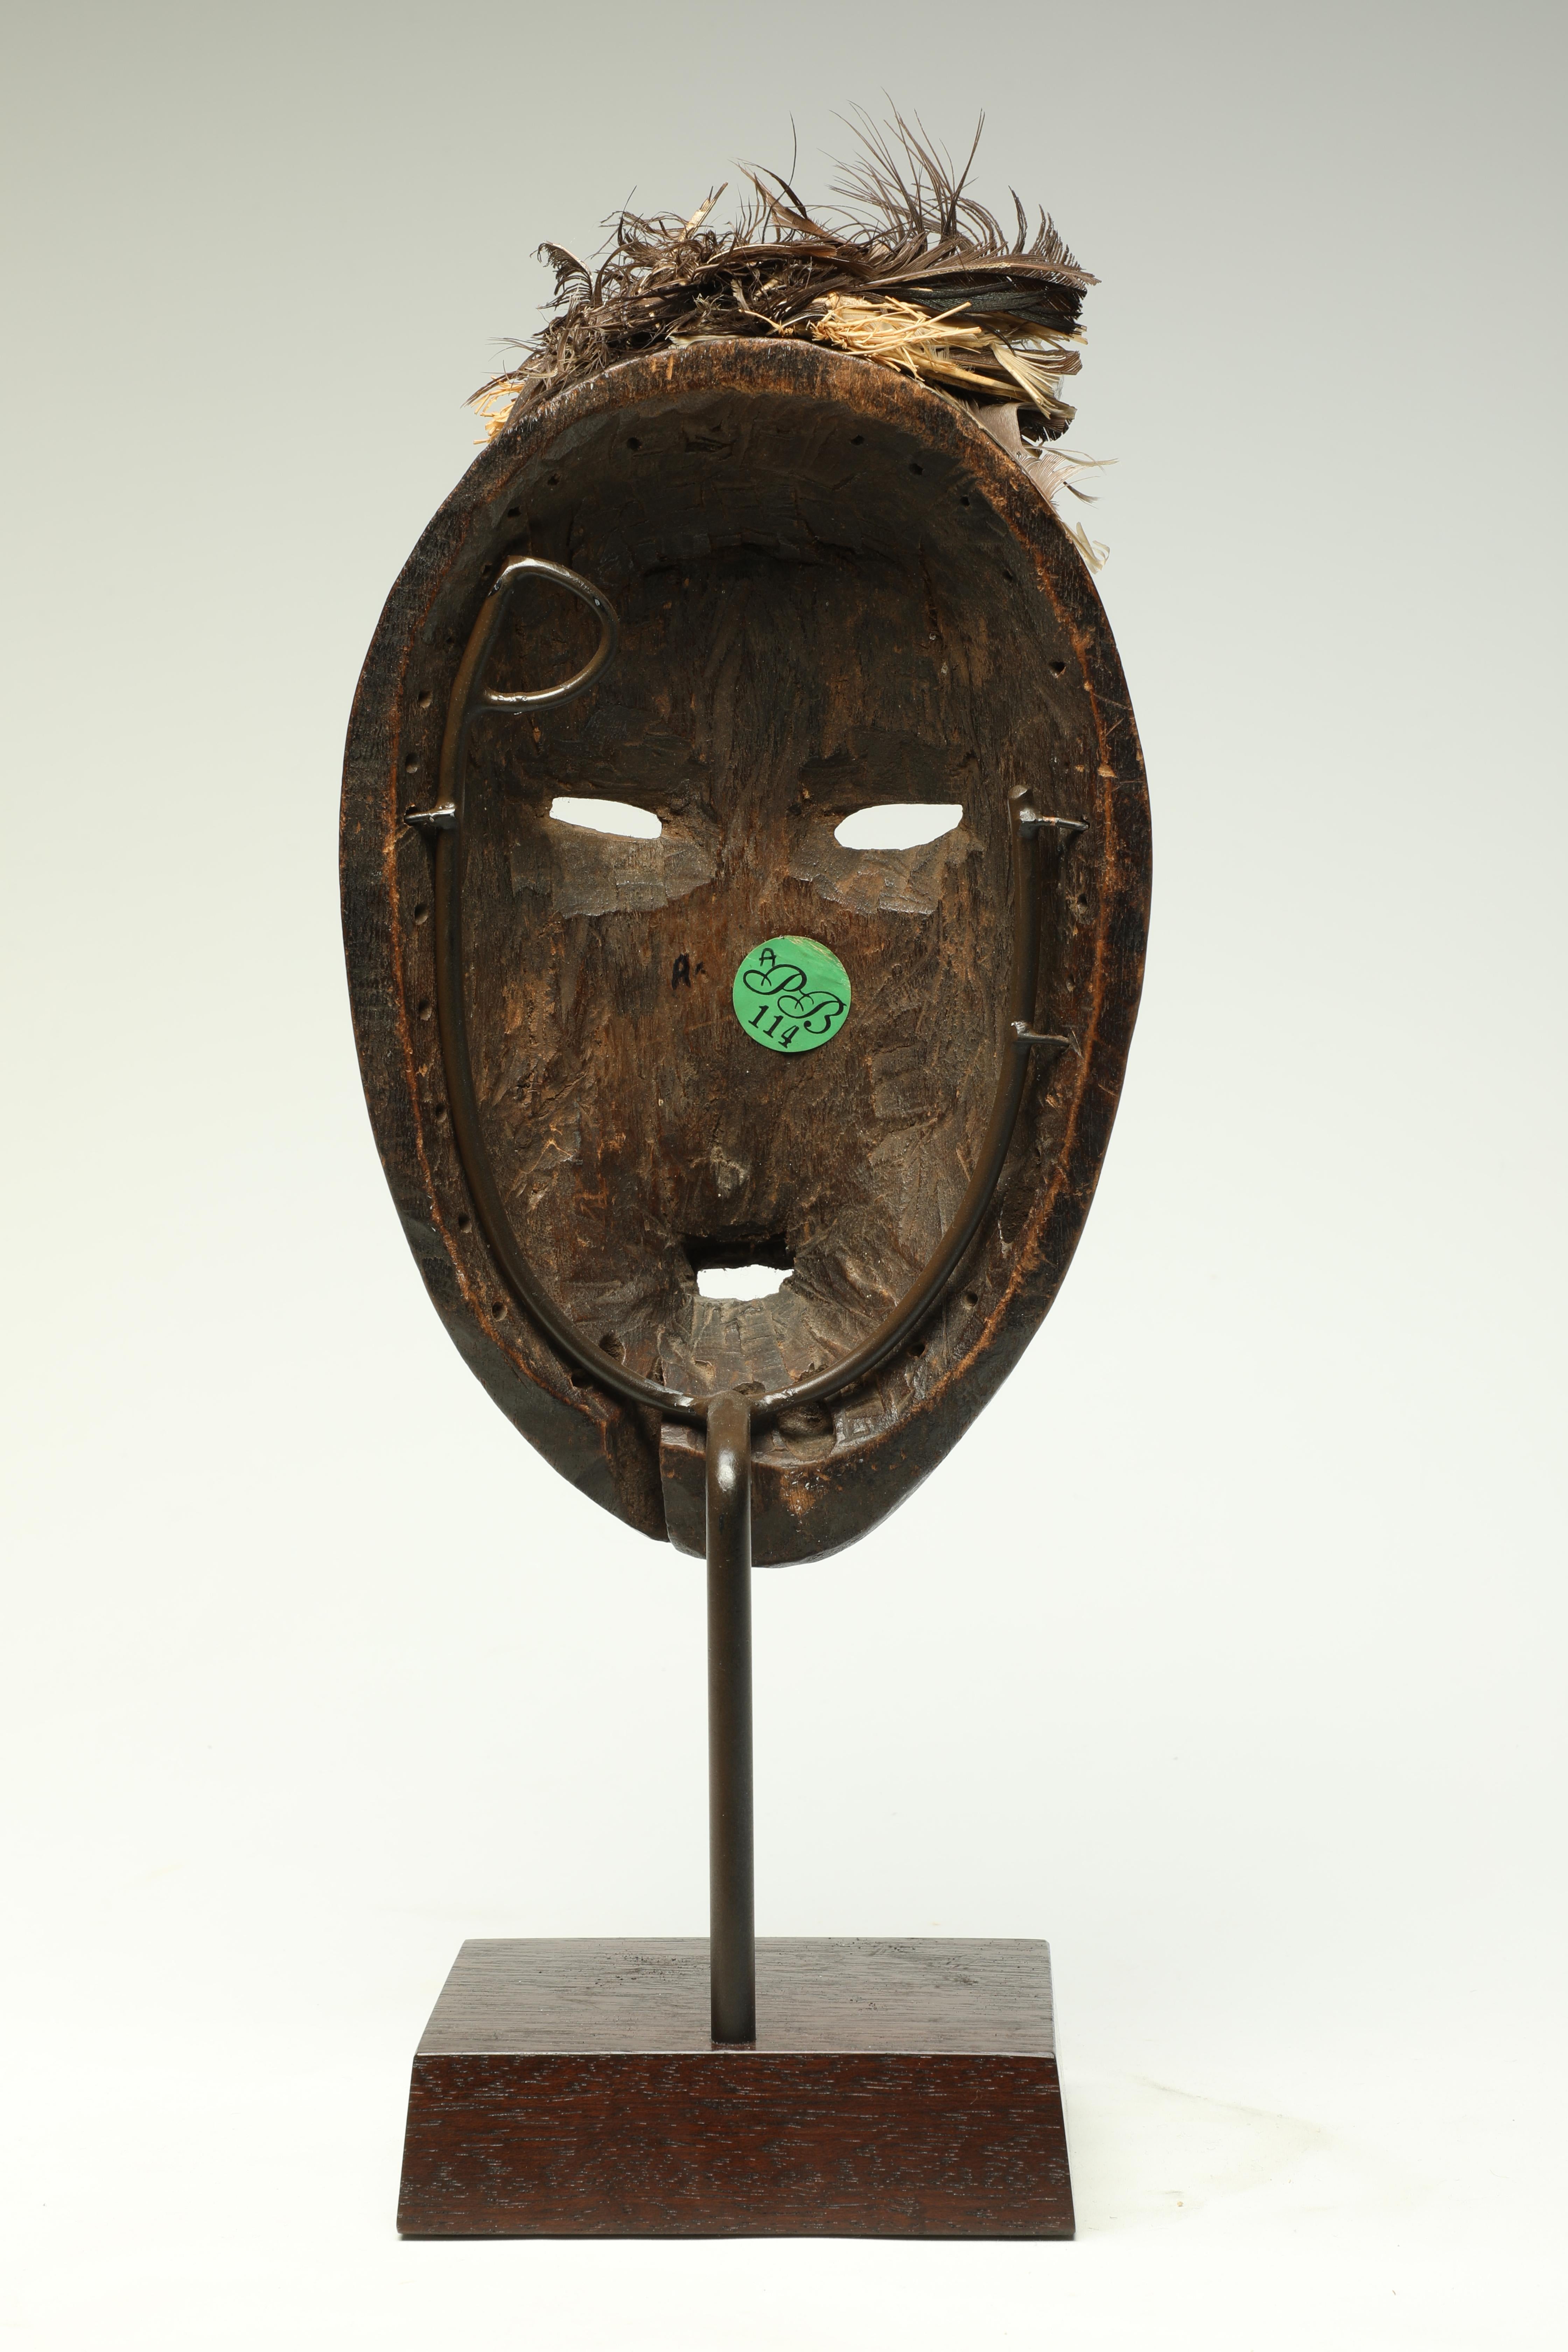 Expressive Early Classic Cubist Dan Mask Early 20th Century Liberia, Africa In Fair Condition For Sale In Point Richmond, CA